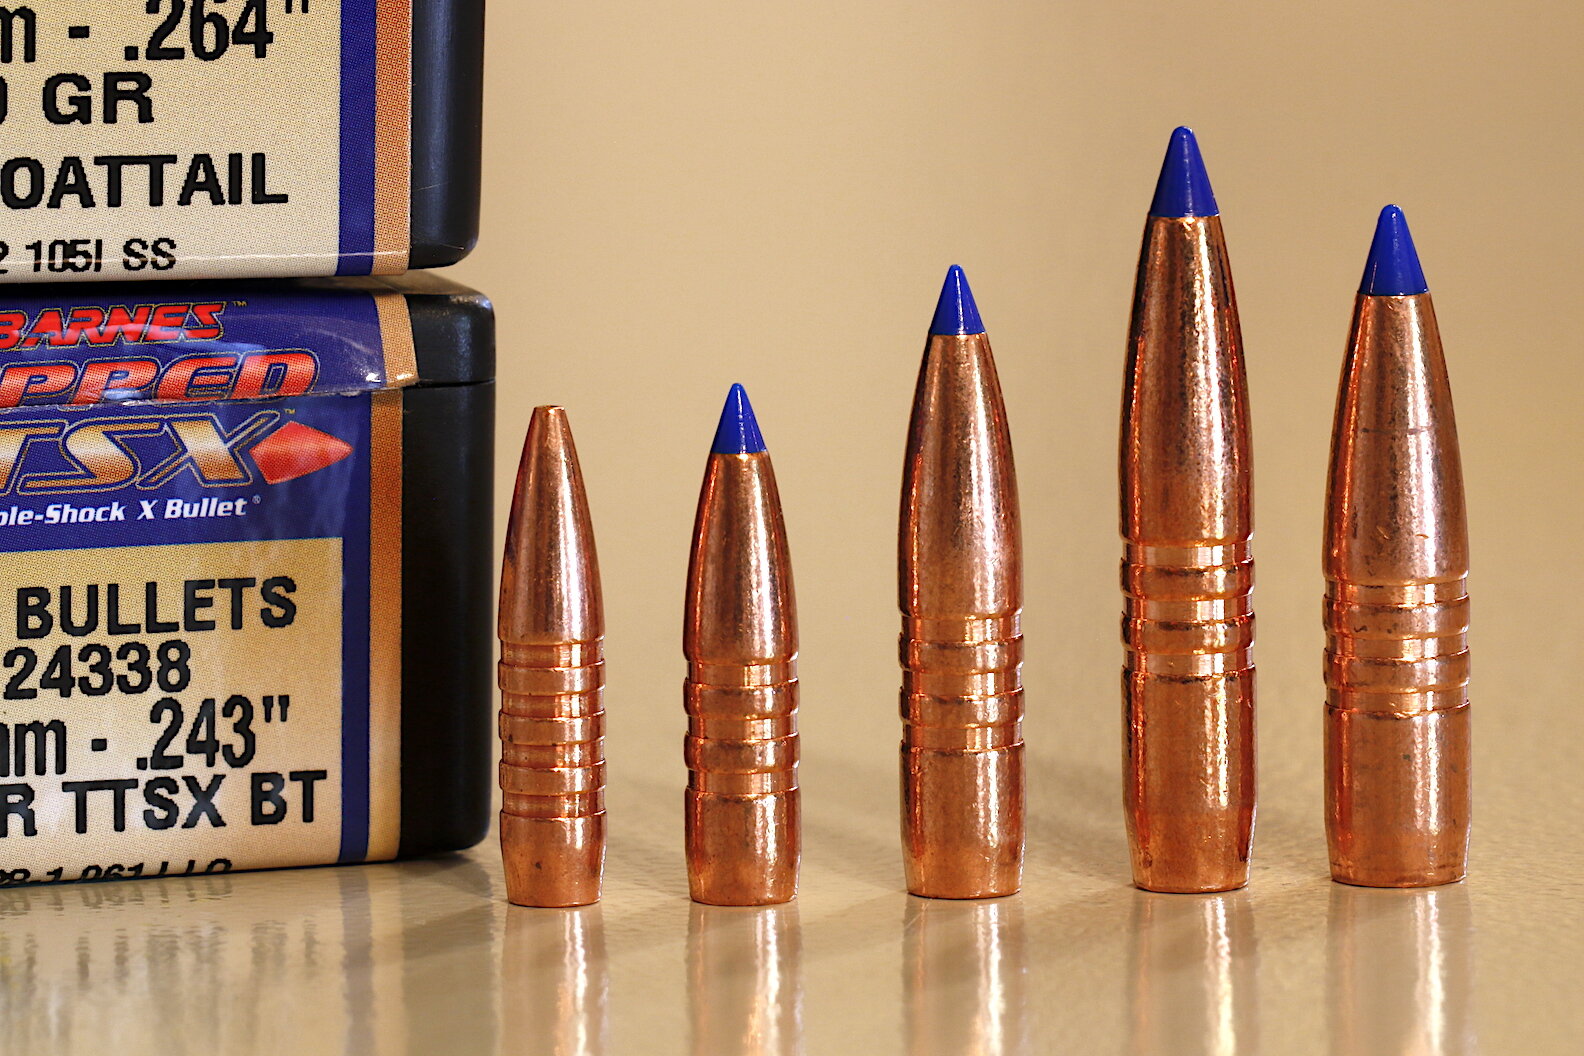 How Fast Does A Bullet Travel - Know The Facts About Bullet Speed